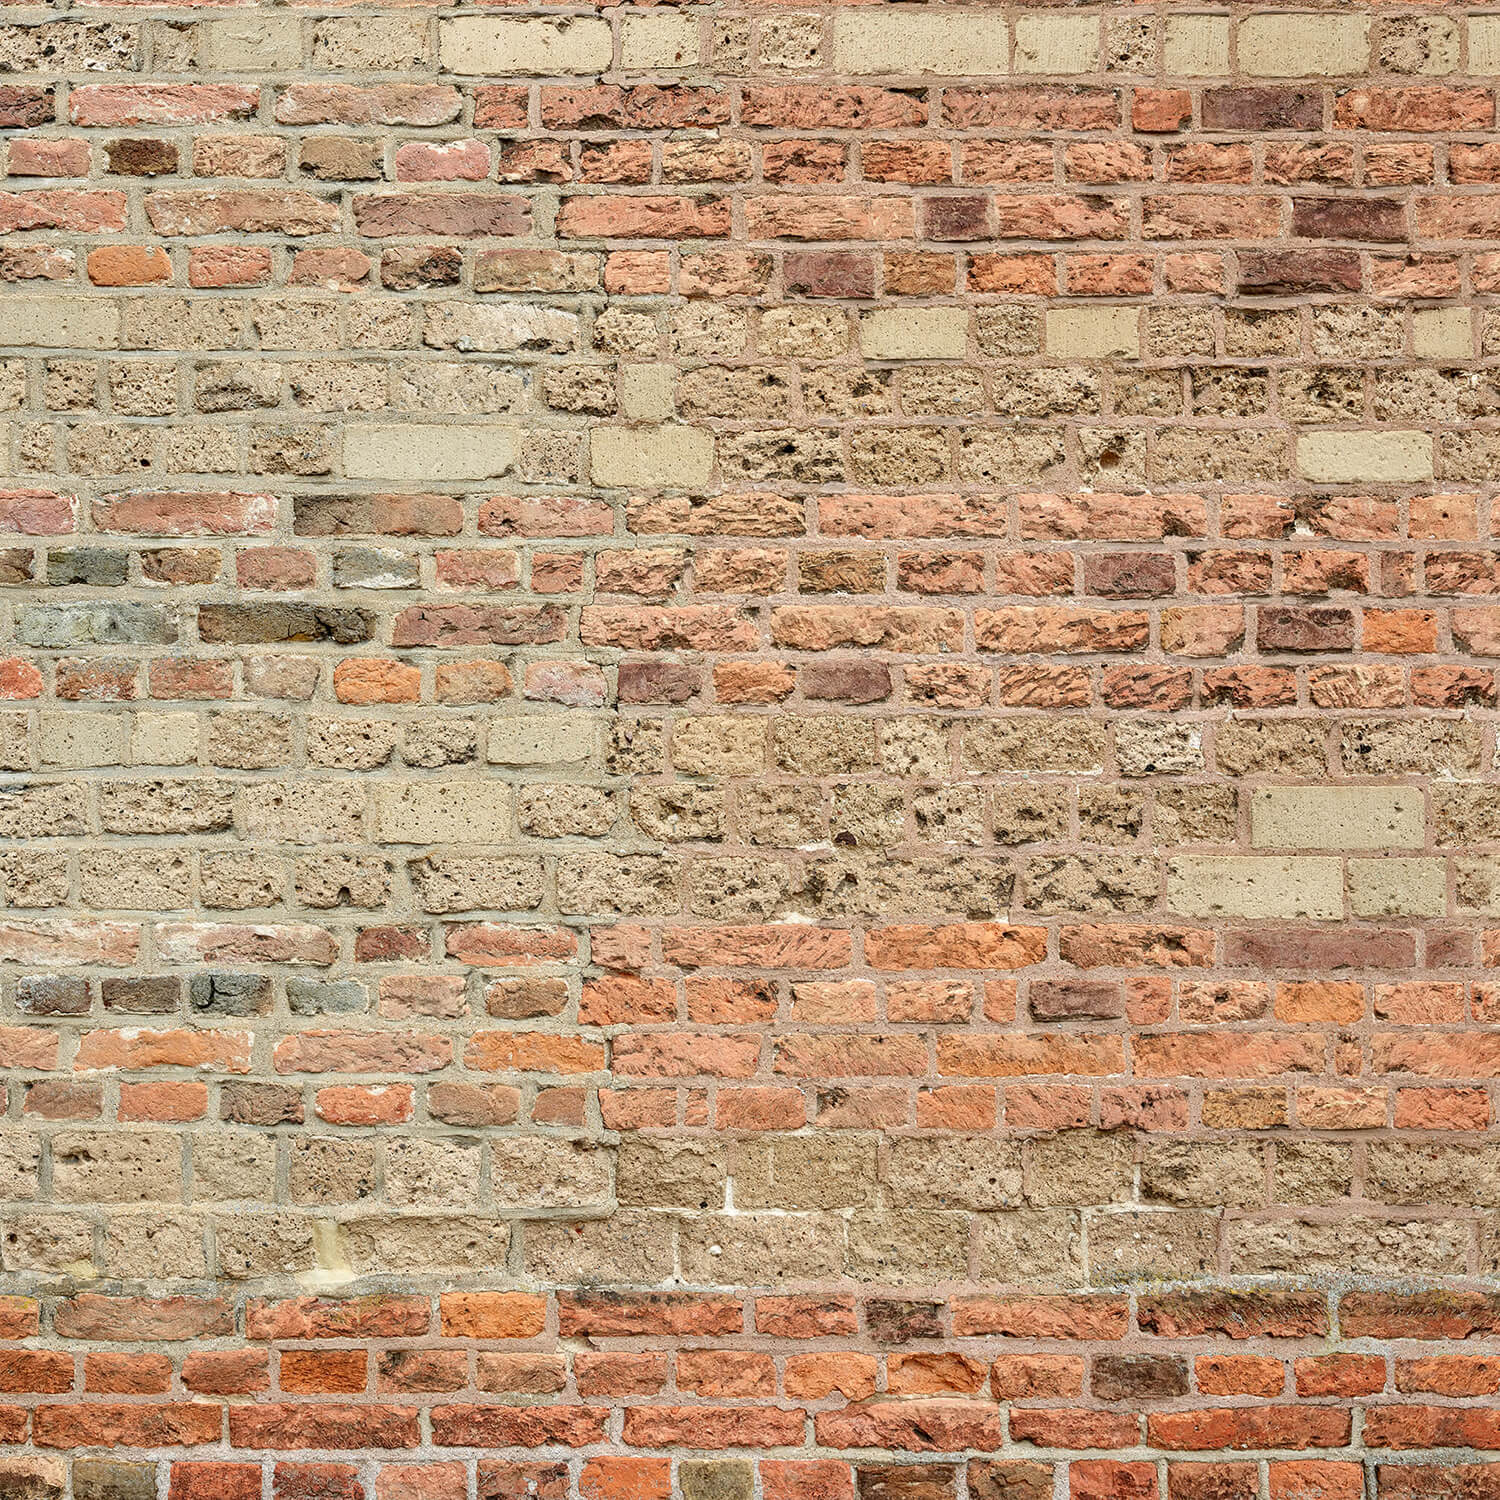 Wall with different bricks